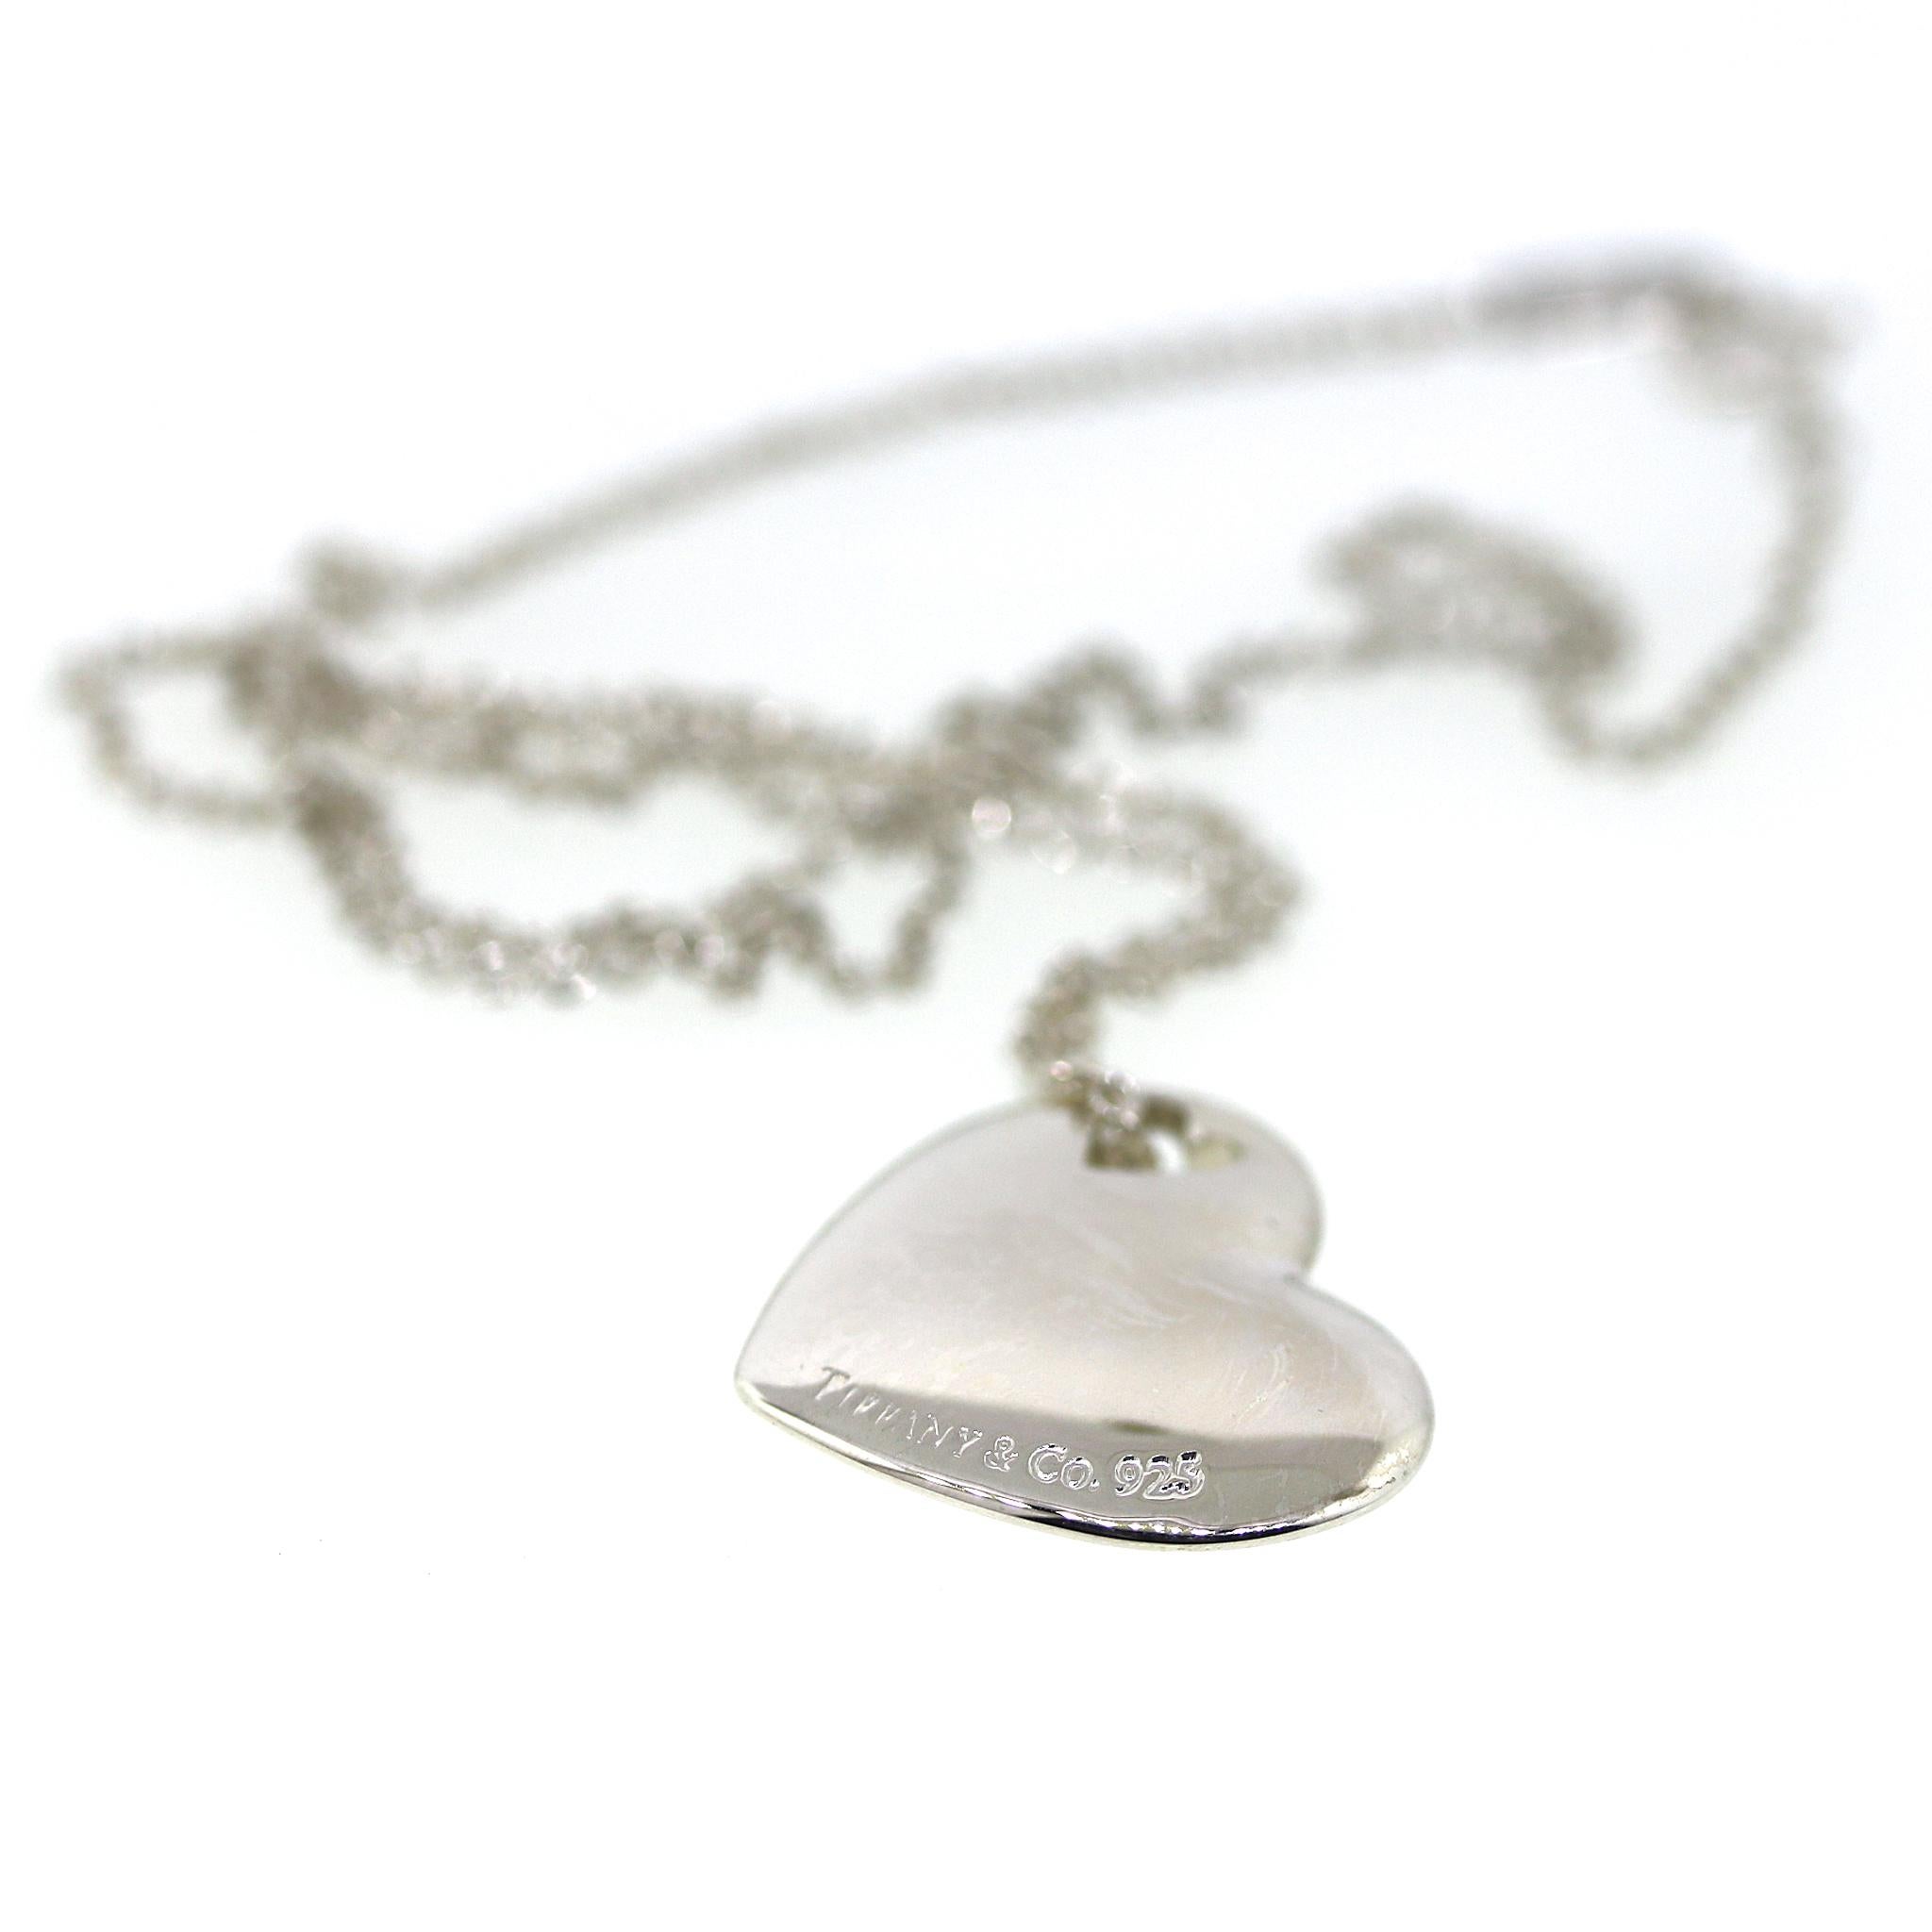 Sterling Silver
Heart Measurement: 20 mm wide, 17 mm long
Chain Length: 16 inches
Total Weight: 8.9 grams